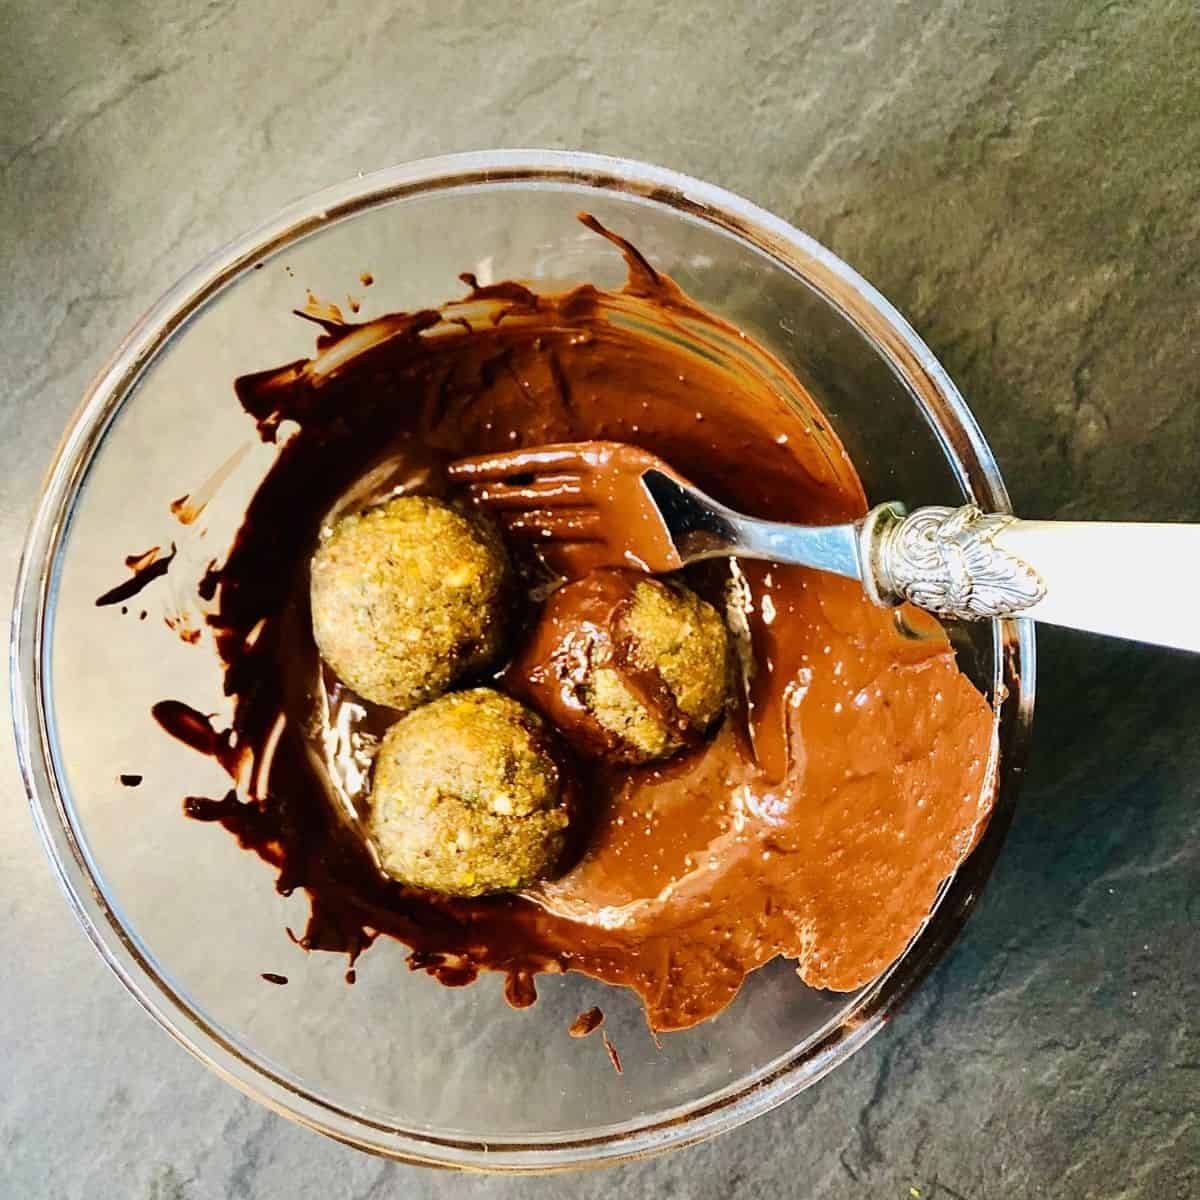 Covering thundai balls in melted chocolate in a glass bowl